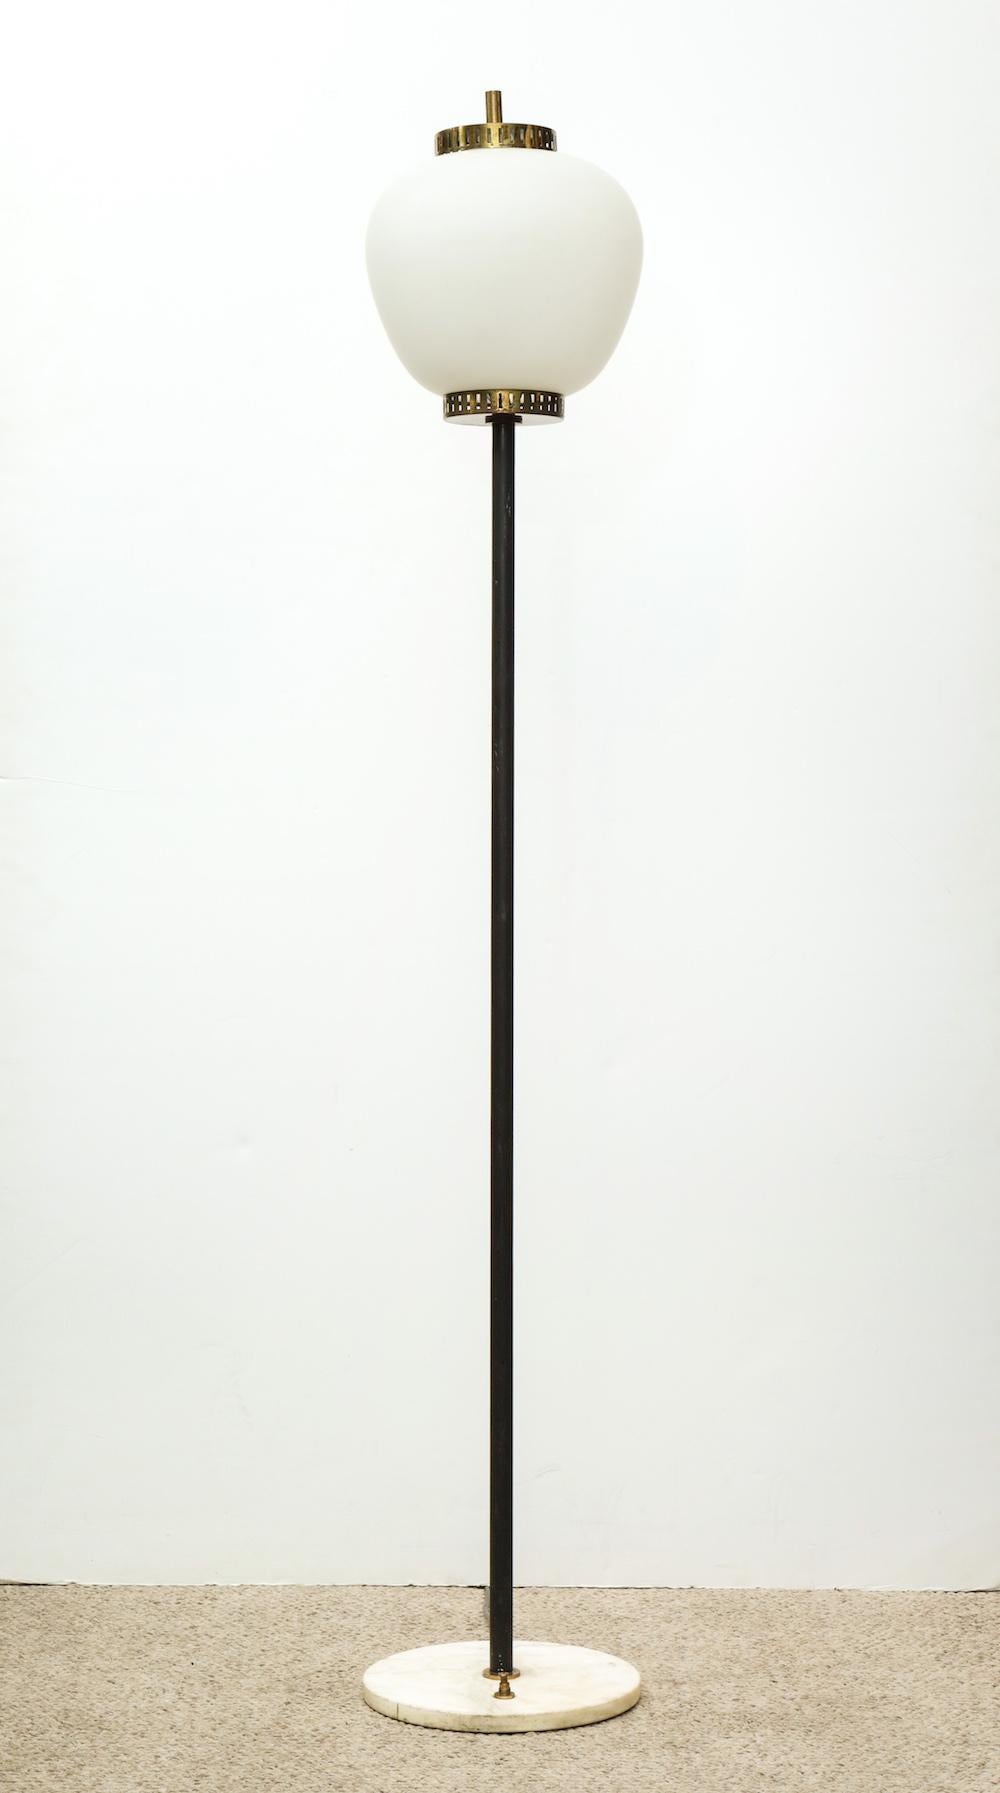 Elegant floor lamp by Stilnovo. Black-painted metal and brass mounts. Frosted glass shade and marble base with original foot-switch. Takes 2 standard-sized edison bulbs. Sockets and wiring has all been recently updated.